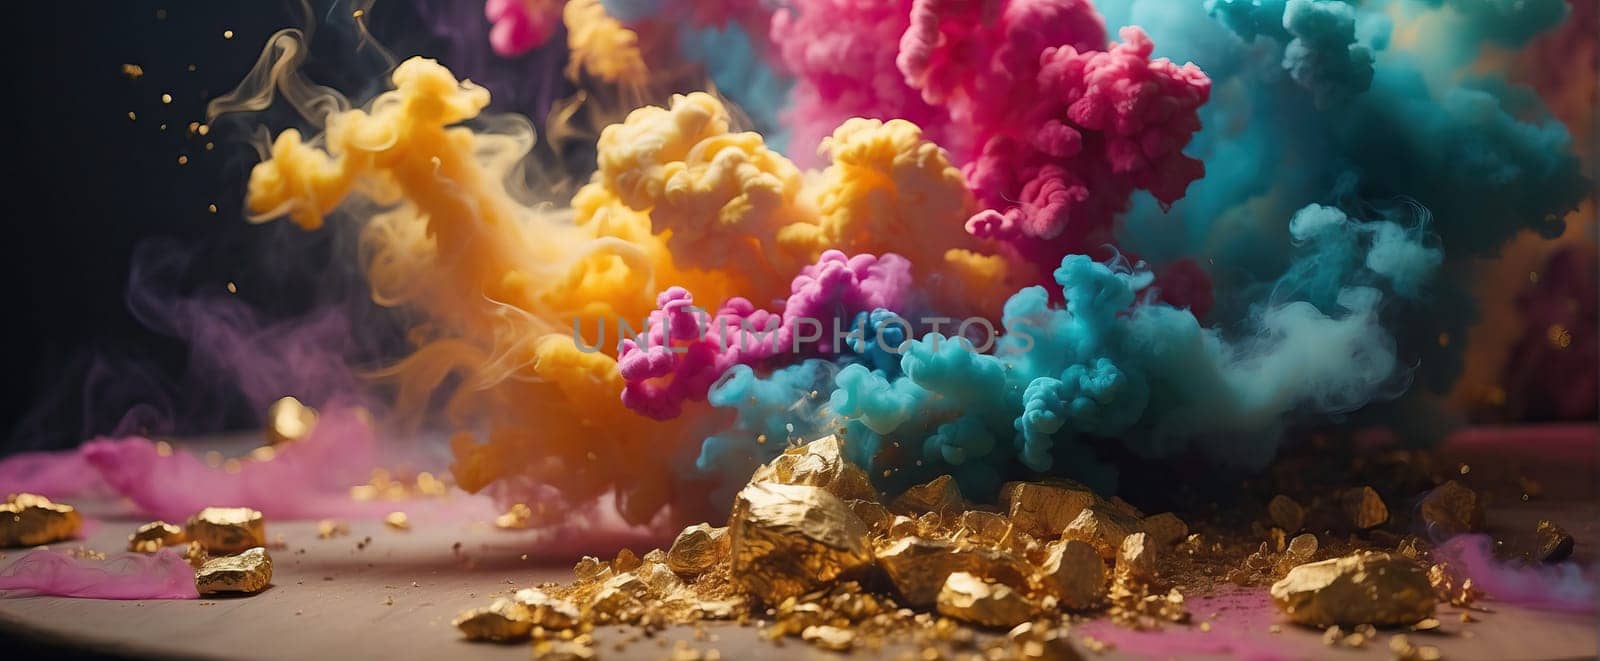 Clouds of colored smoke by applesstock